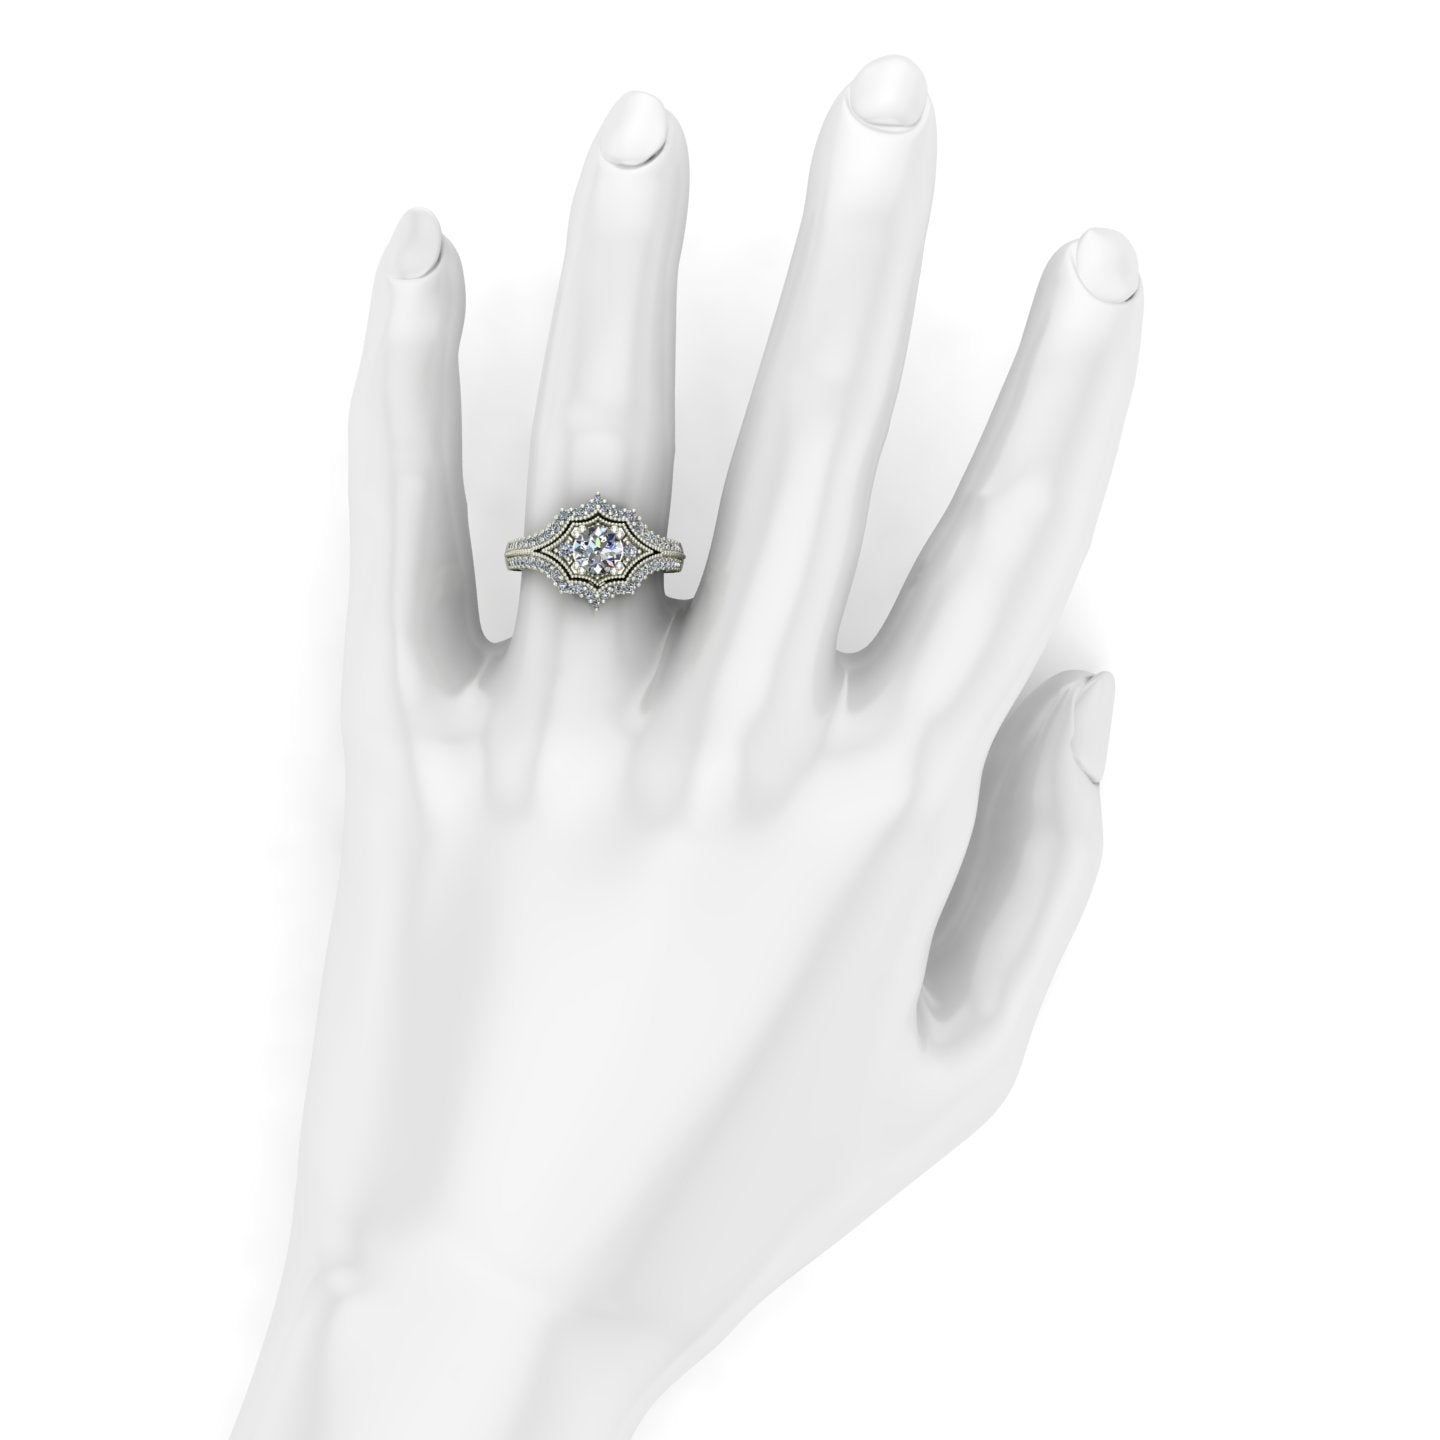 three quarter carat diamond three stone engagement ring with floral carving in 14k white gold - Charles Babb Designs - on hand